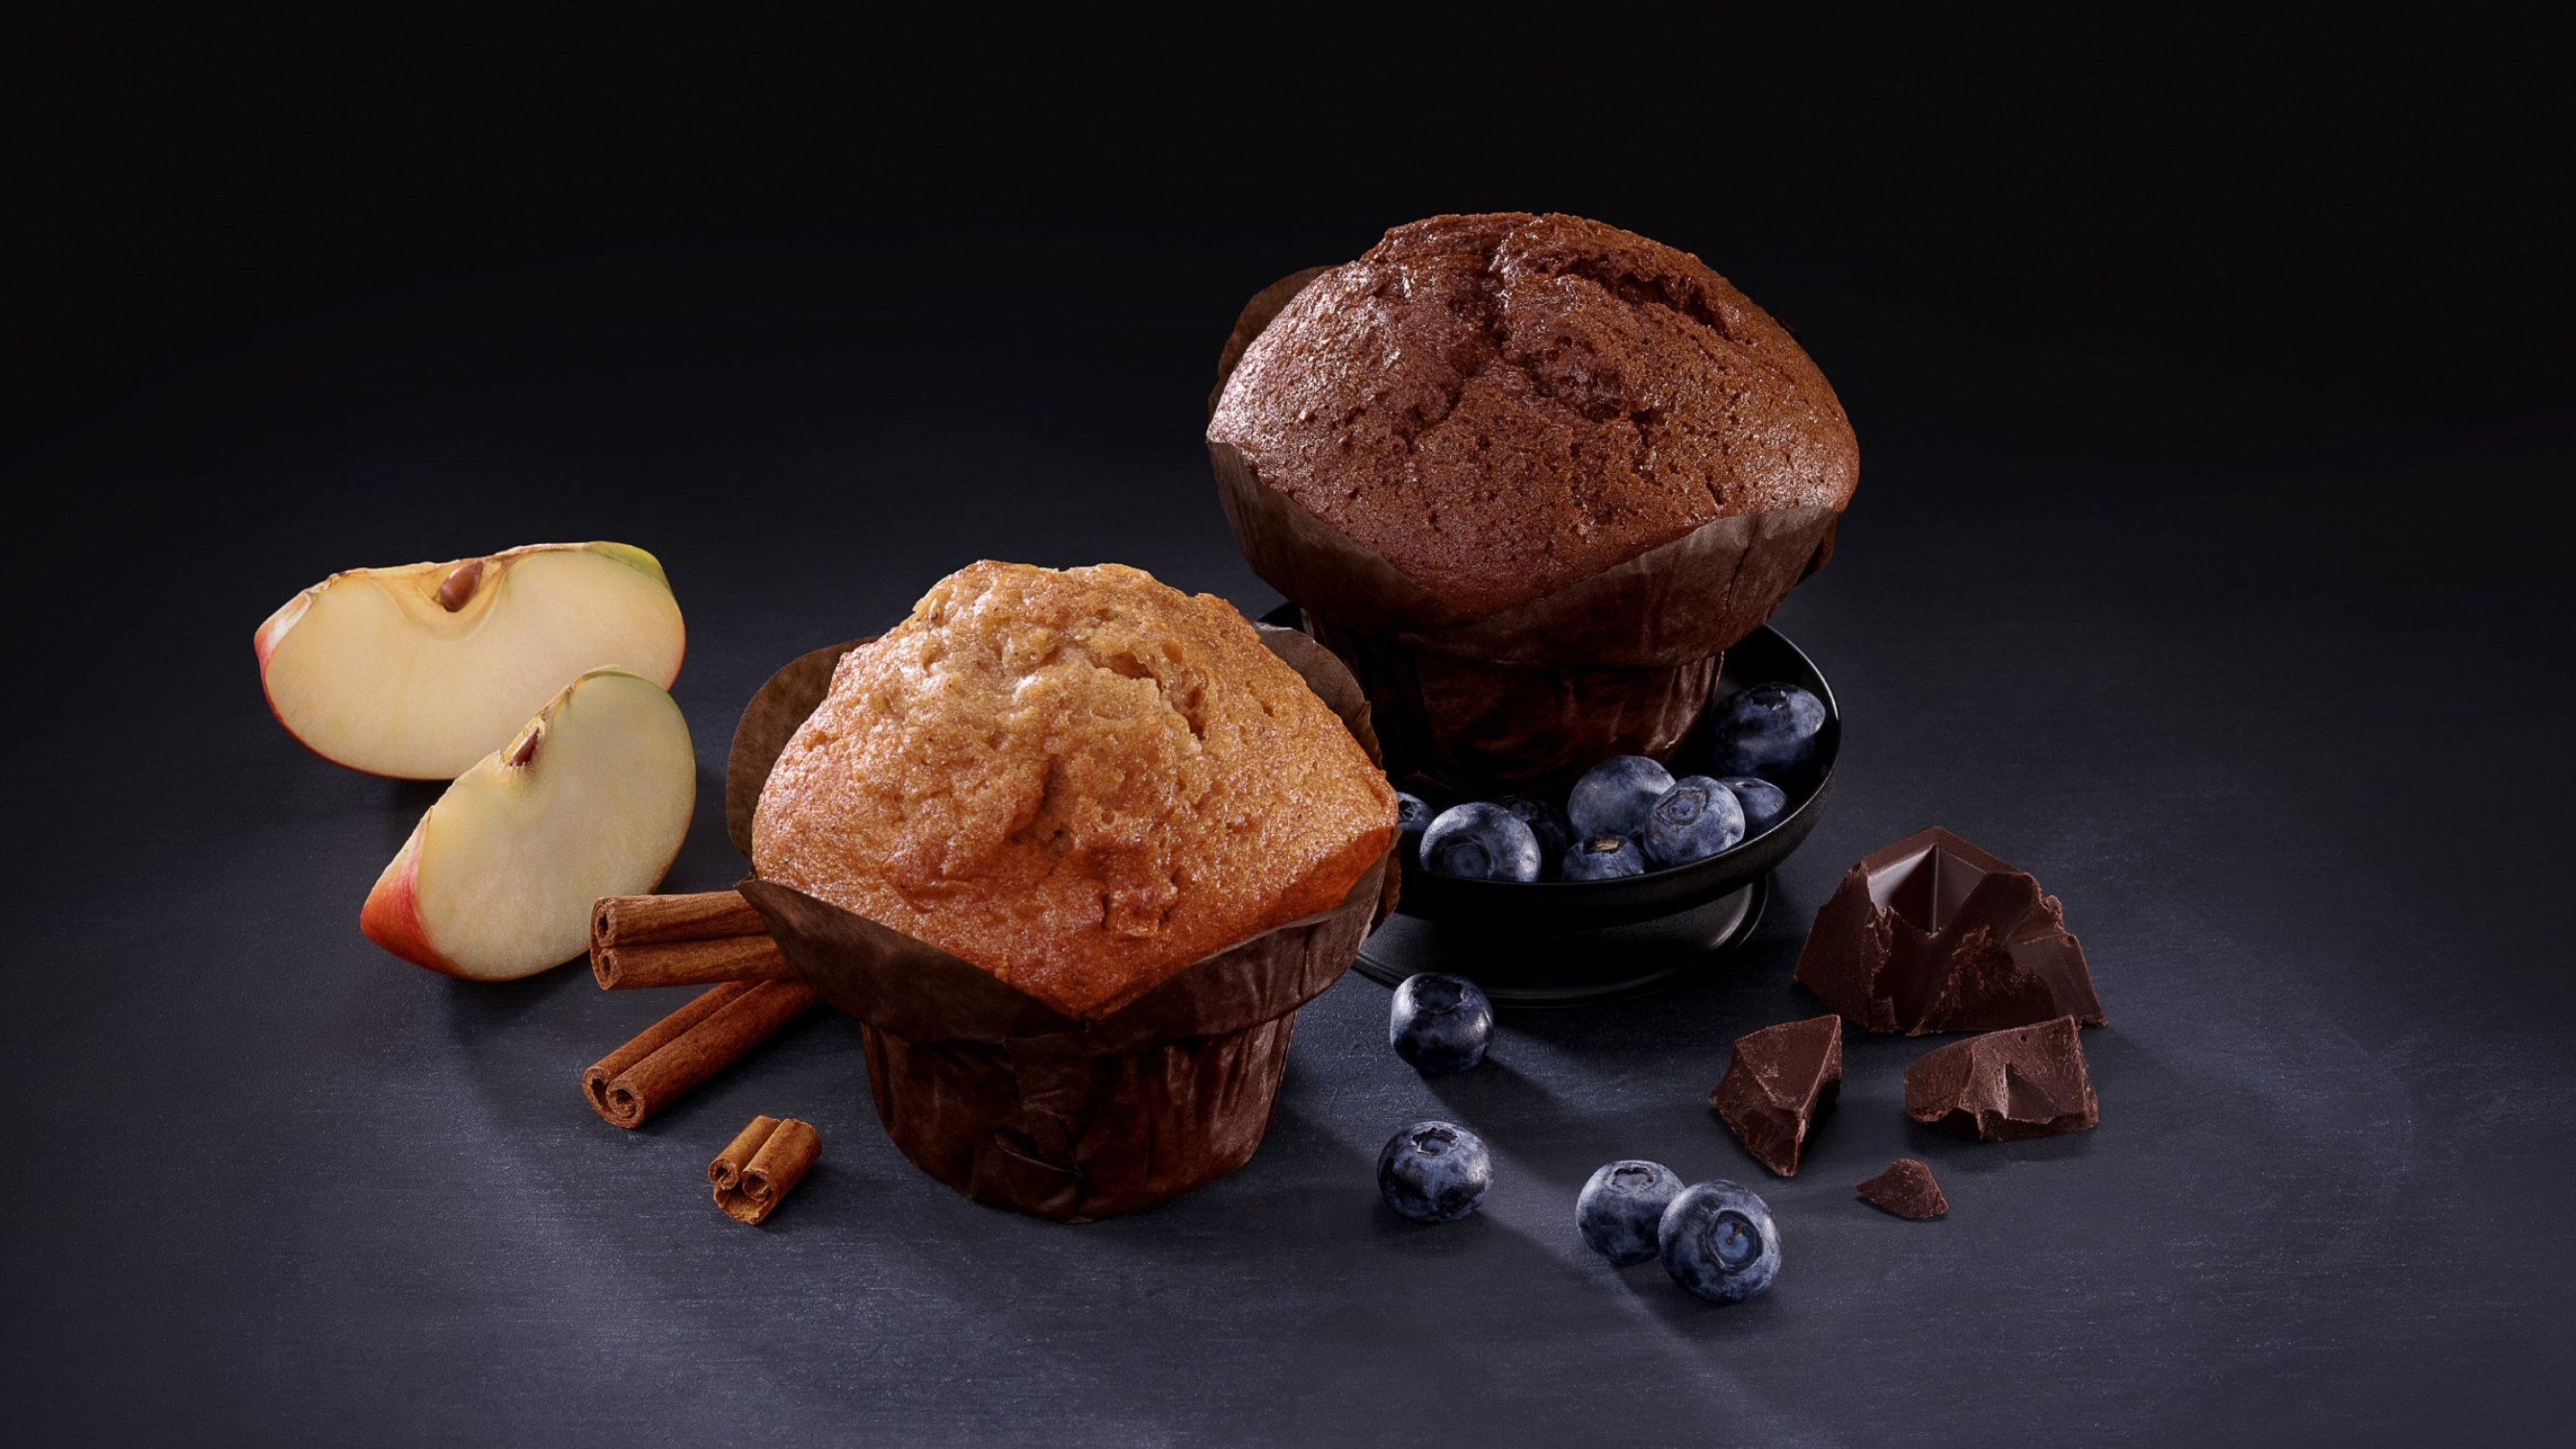 Muffin: A small, individual-sized baked good, Enjoyed as a snack or breakfast item. 2880x1620 HD Background.